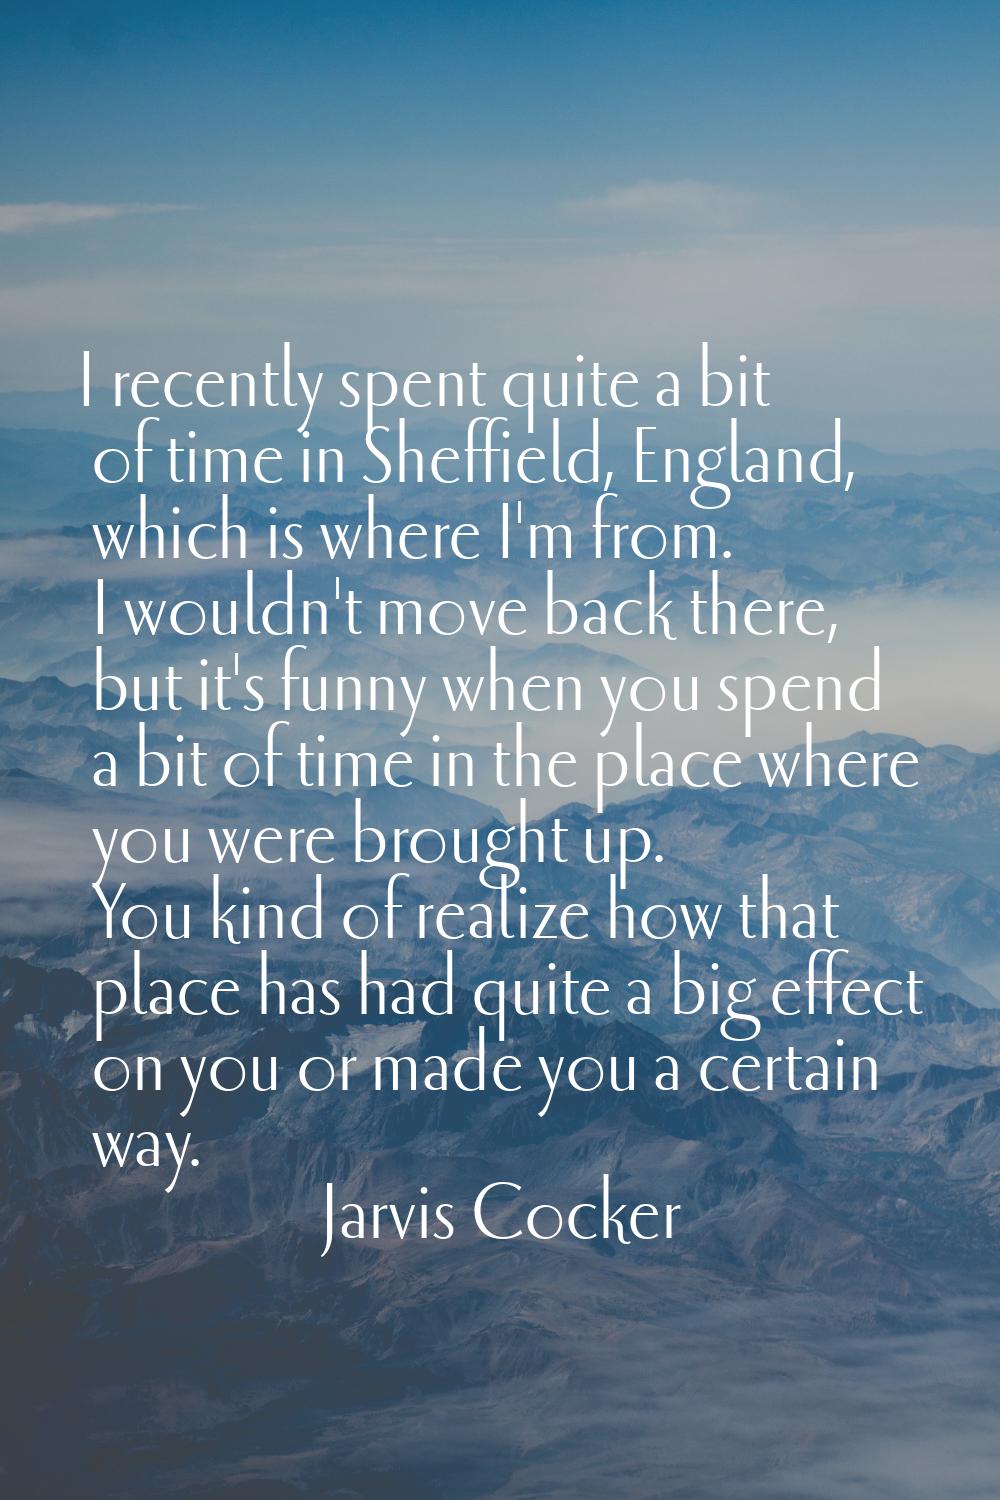 I recently spent quite a bit of time in Sheffield, England, which is where I'm from. I wouldn't mov